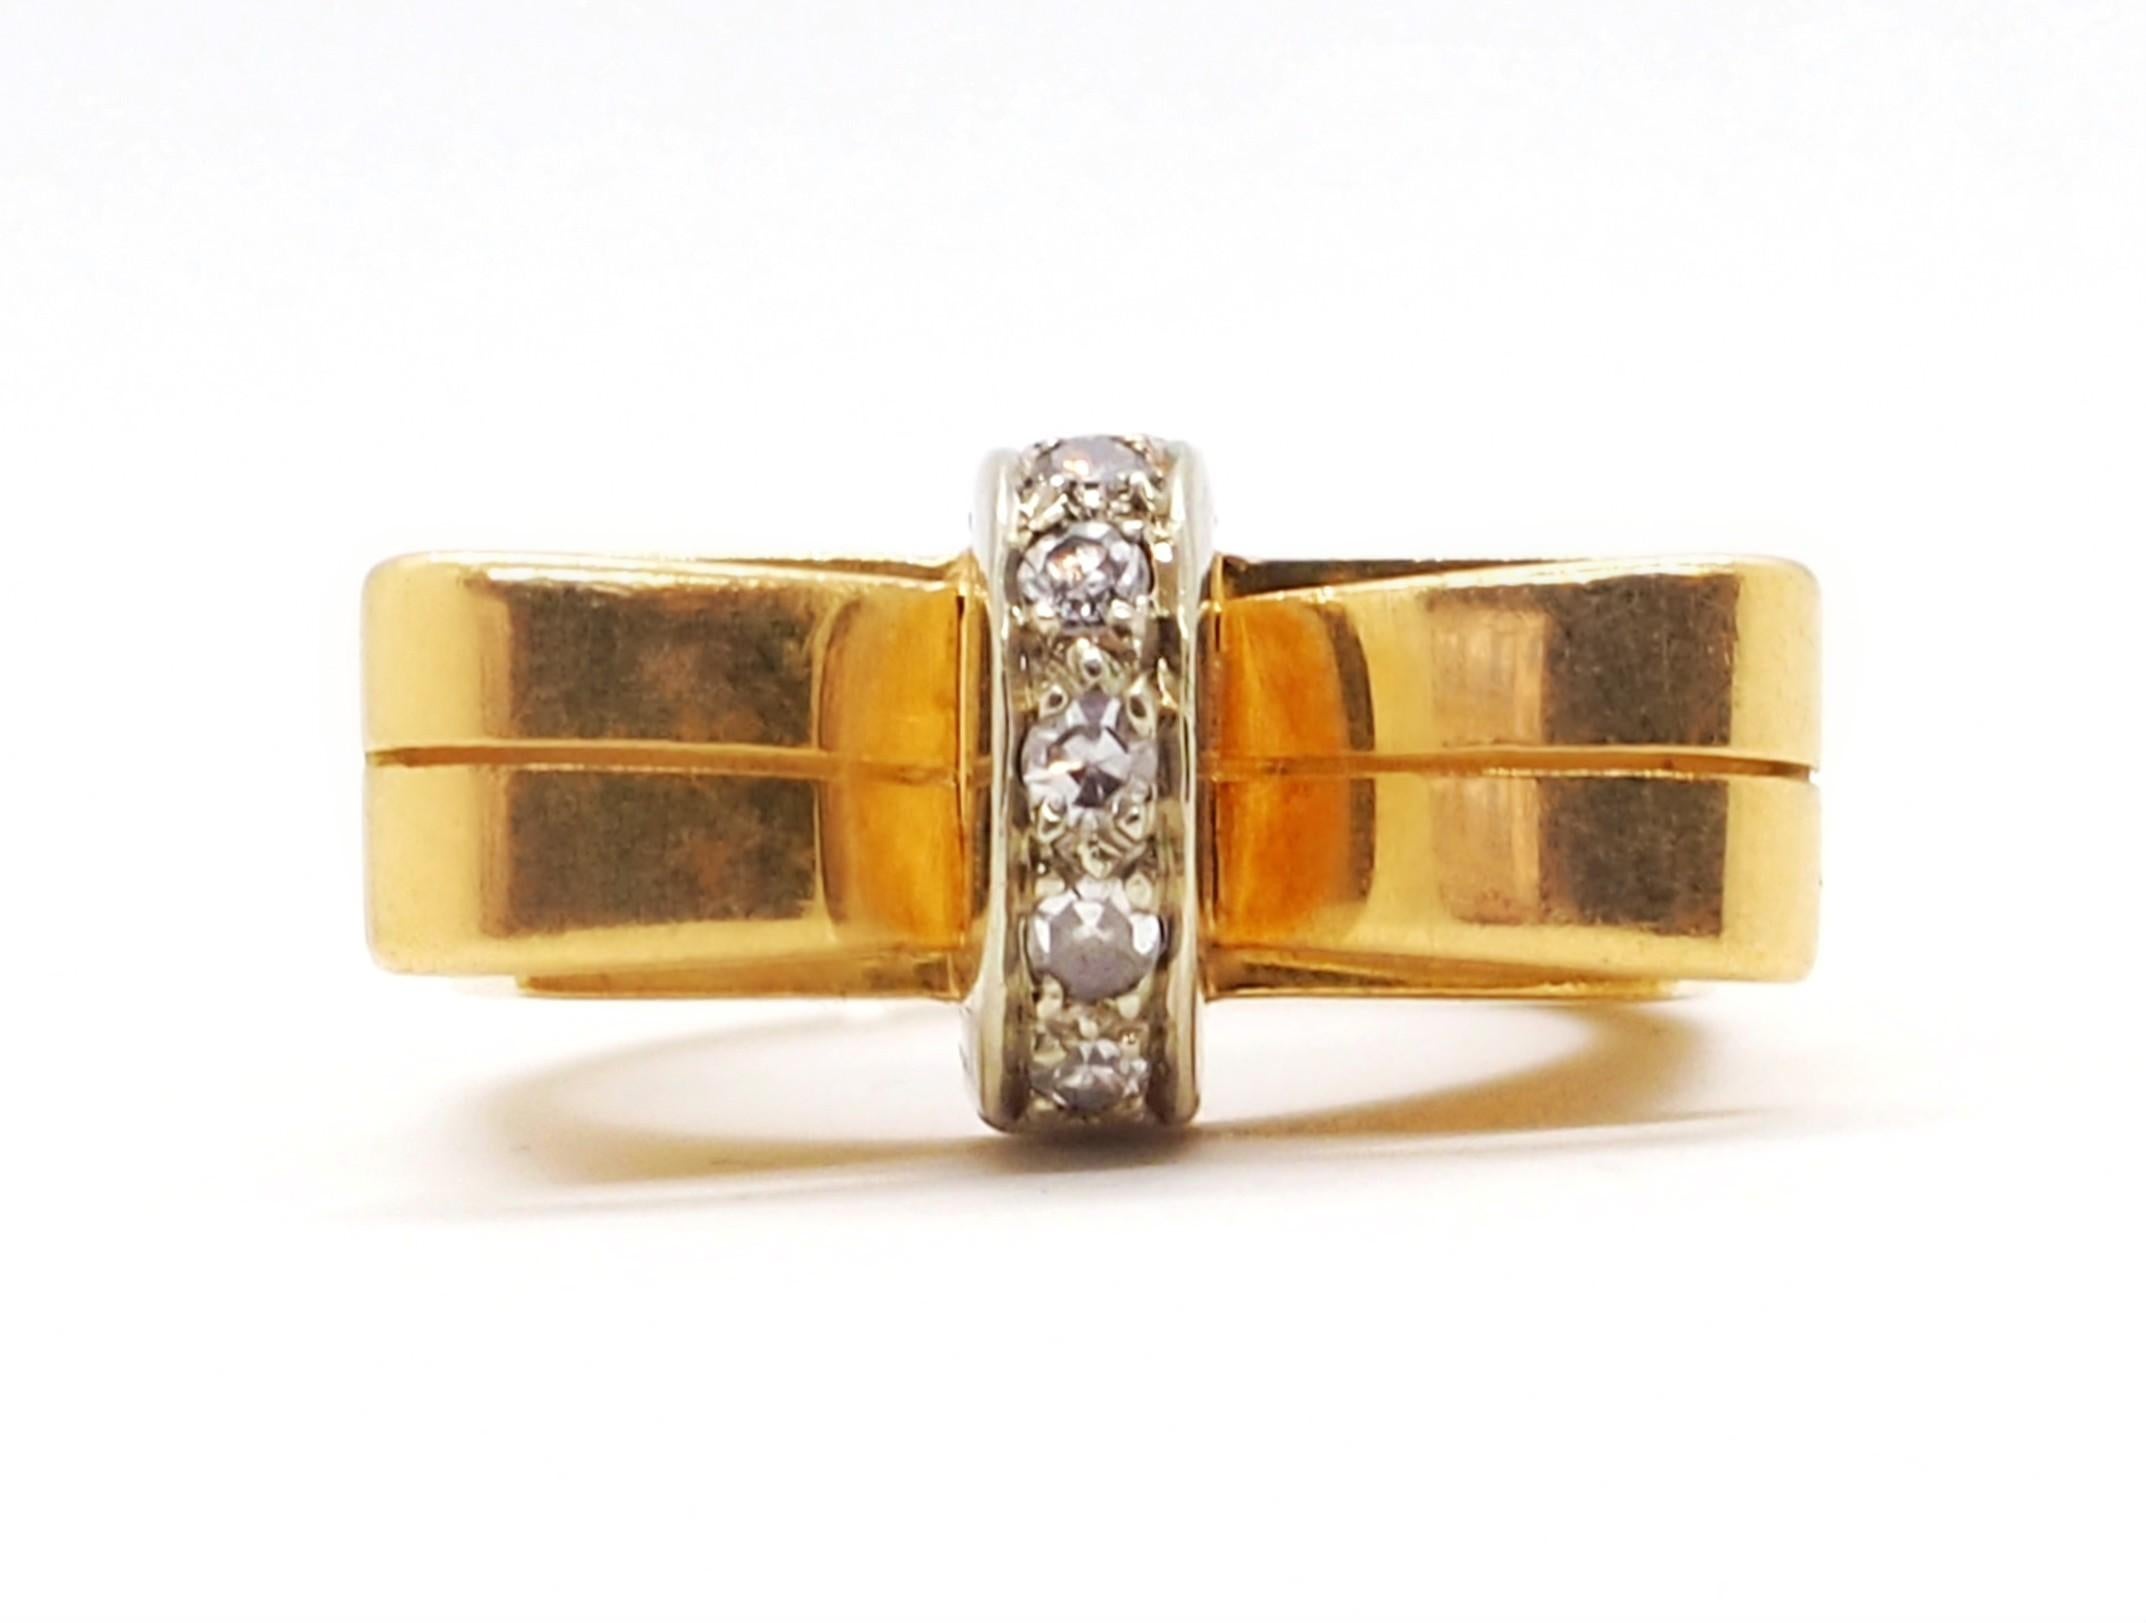 An elegant diamond ring crafted in 18 K yellow and white gold. The superior part of the ring is represented by a bow with a white gold center which is paved with 5 diamonds (0.25 carat).

Total weight: 9.5 grams
EU size: 44
US size: 3

The Ring can